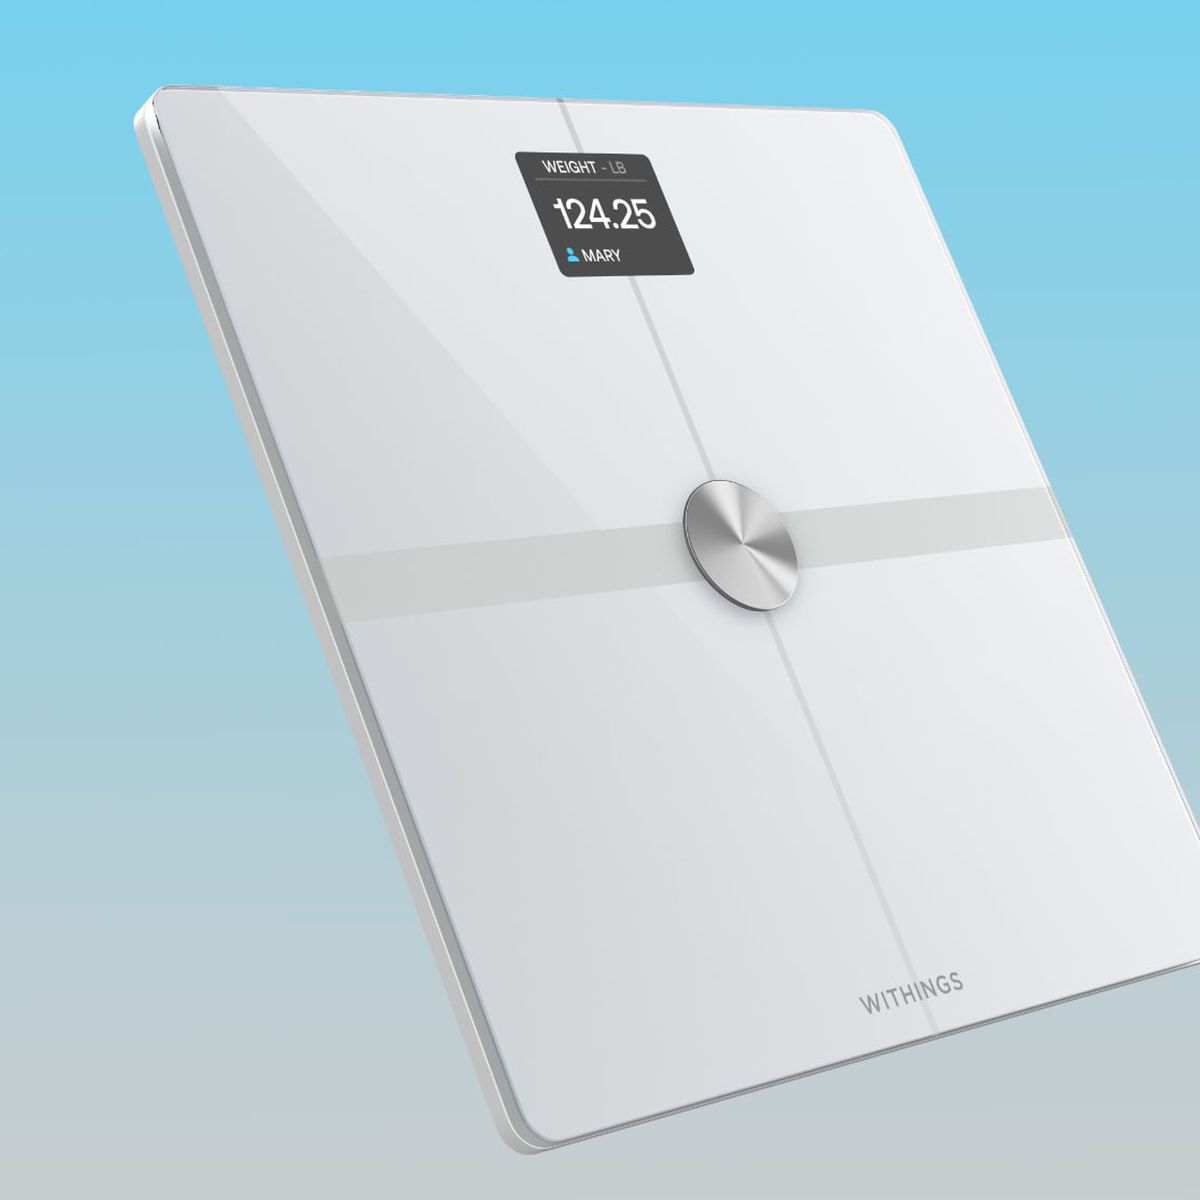 https://images.macrumors.com/t/frRQaUAKcgg2W88legN-z-zMtqw=/1200x1200/smart/article-new/2023/04/withings-smart-scale.jpg